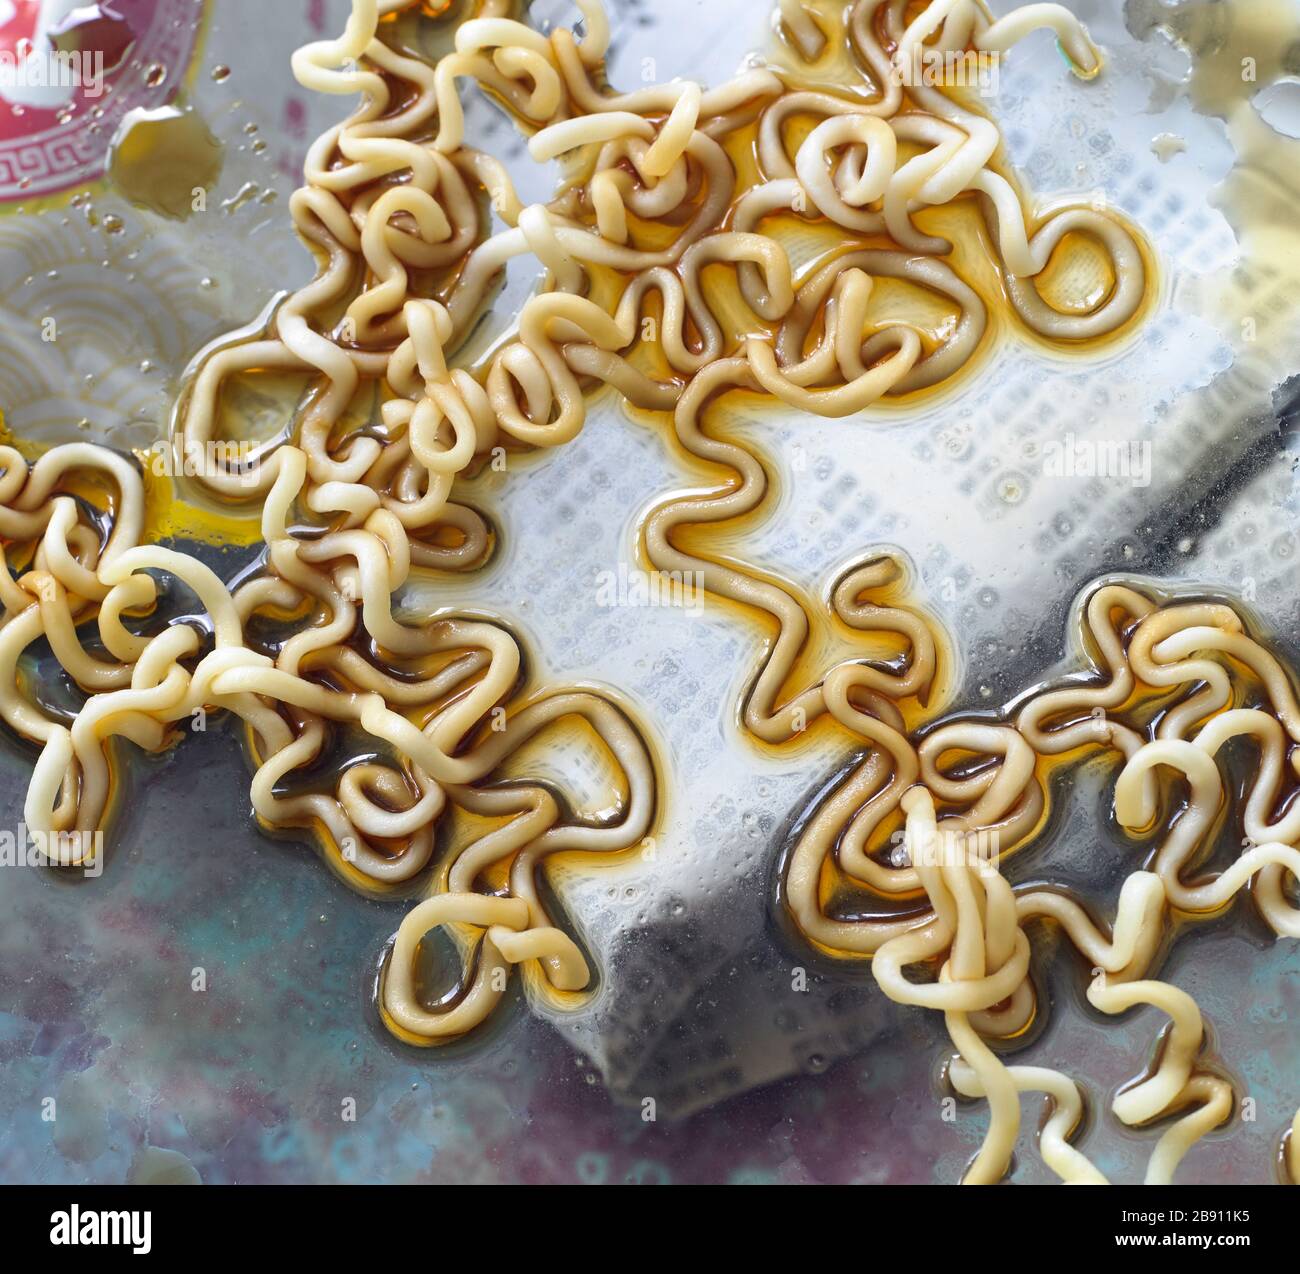 Noodles with soy sauce on a glass table Stock Photo